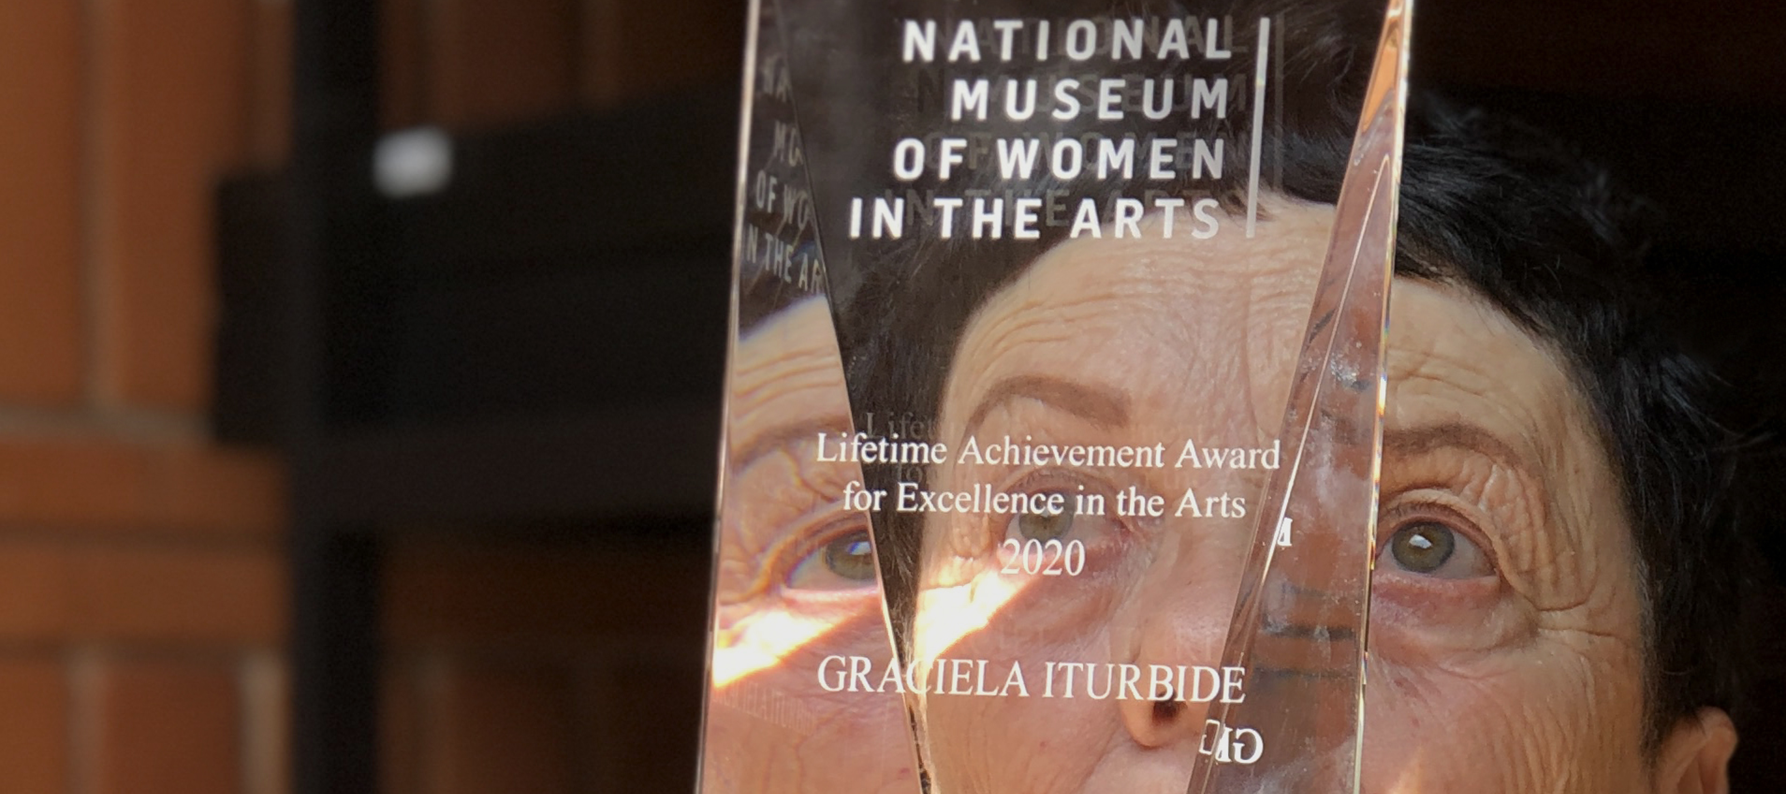 A light-skinned older woman with brown cropped hair holds a clear rectangular award up to her face, so that half of her face is visible through the award; sunlight streams in on the woman's face and hands.